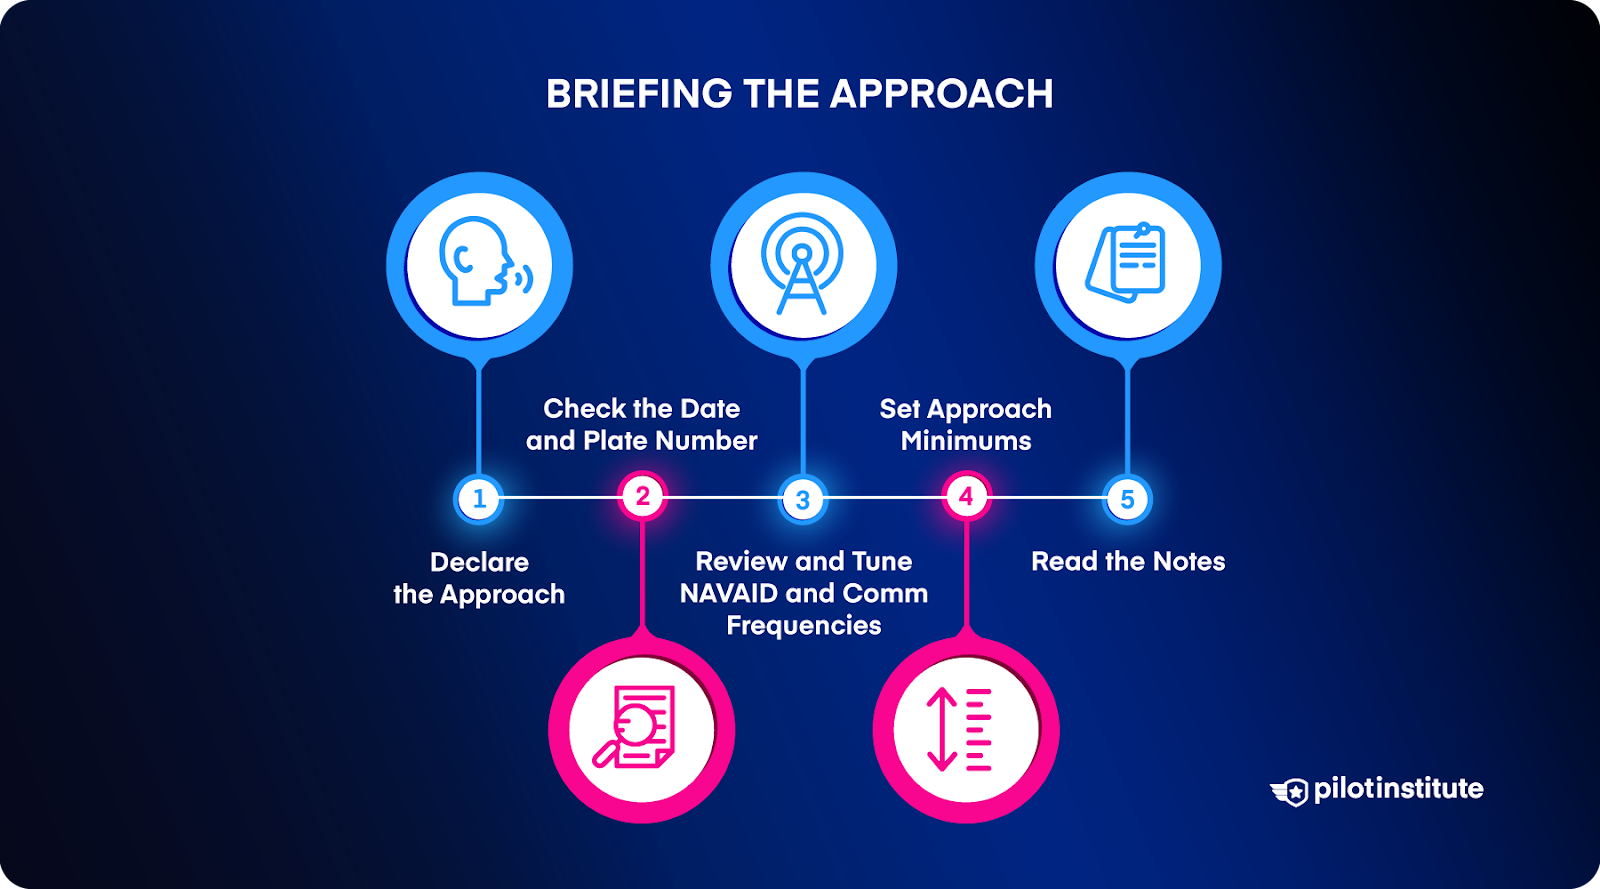 Briefing the Approach infographic.